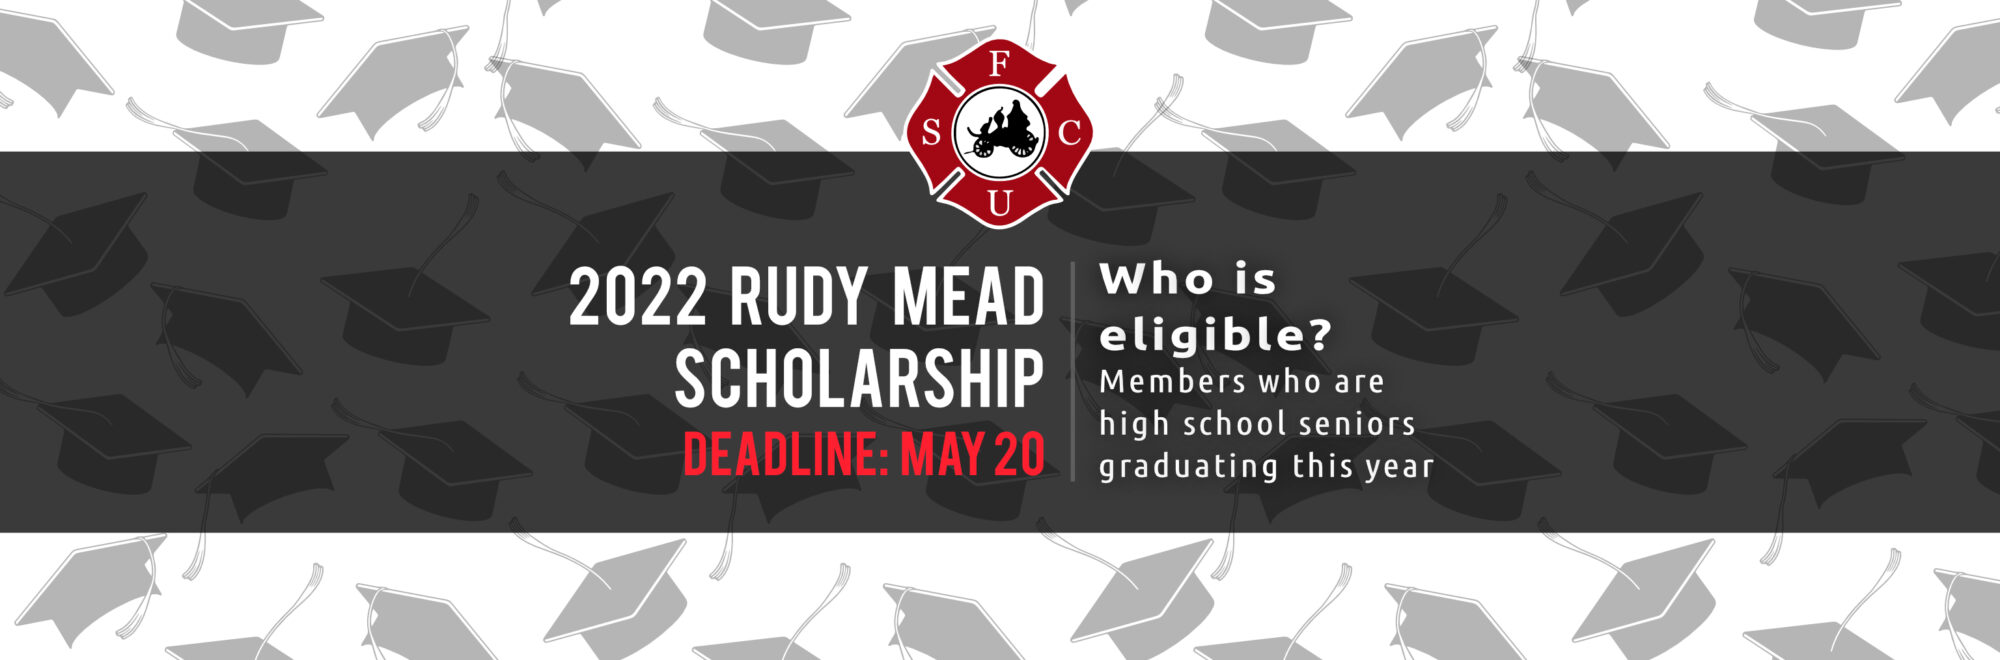 2022 Rudy Mead Scholarship. Deadline: May 20. Who is eligible? Members who are high school seniors graduating this year.